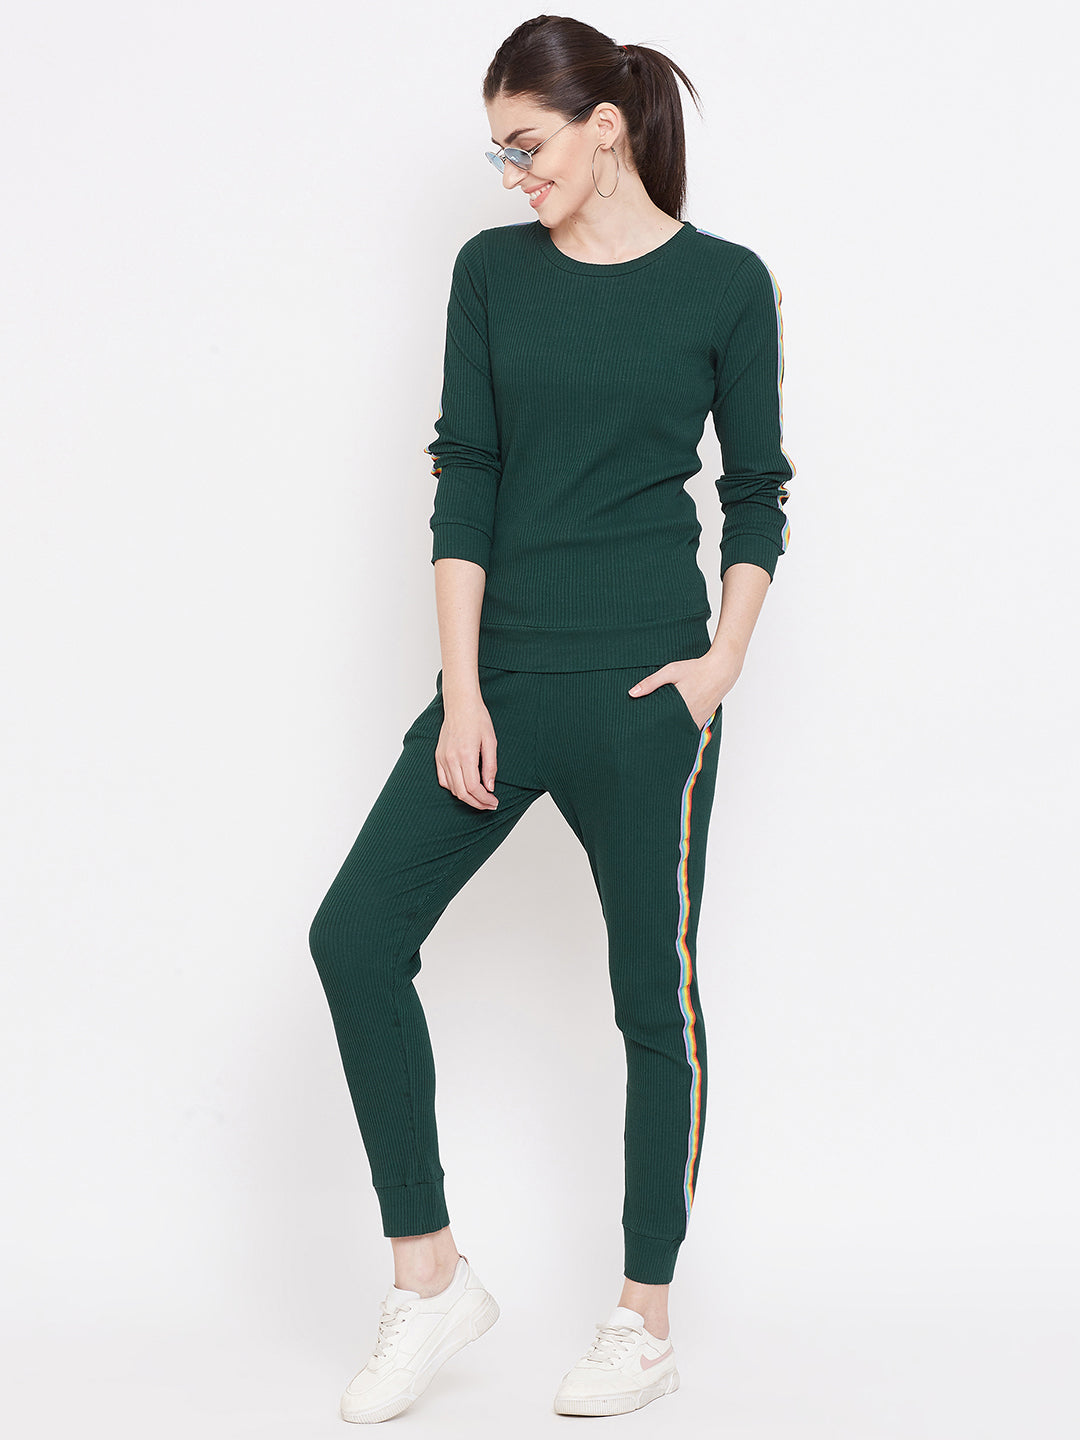 Austin Wood Women's Green Full Sleeves Solid Track Suit